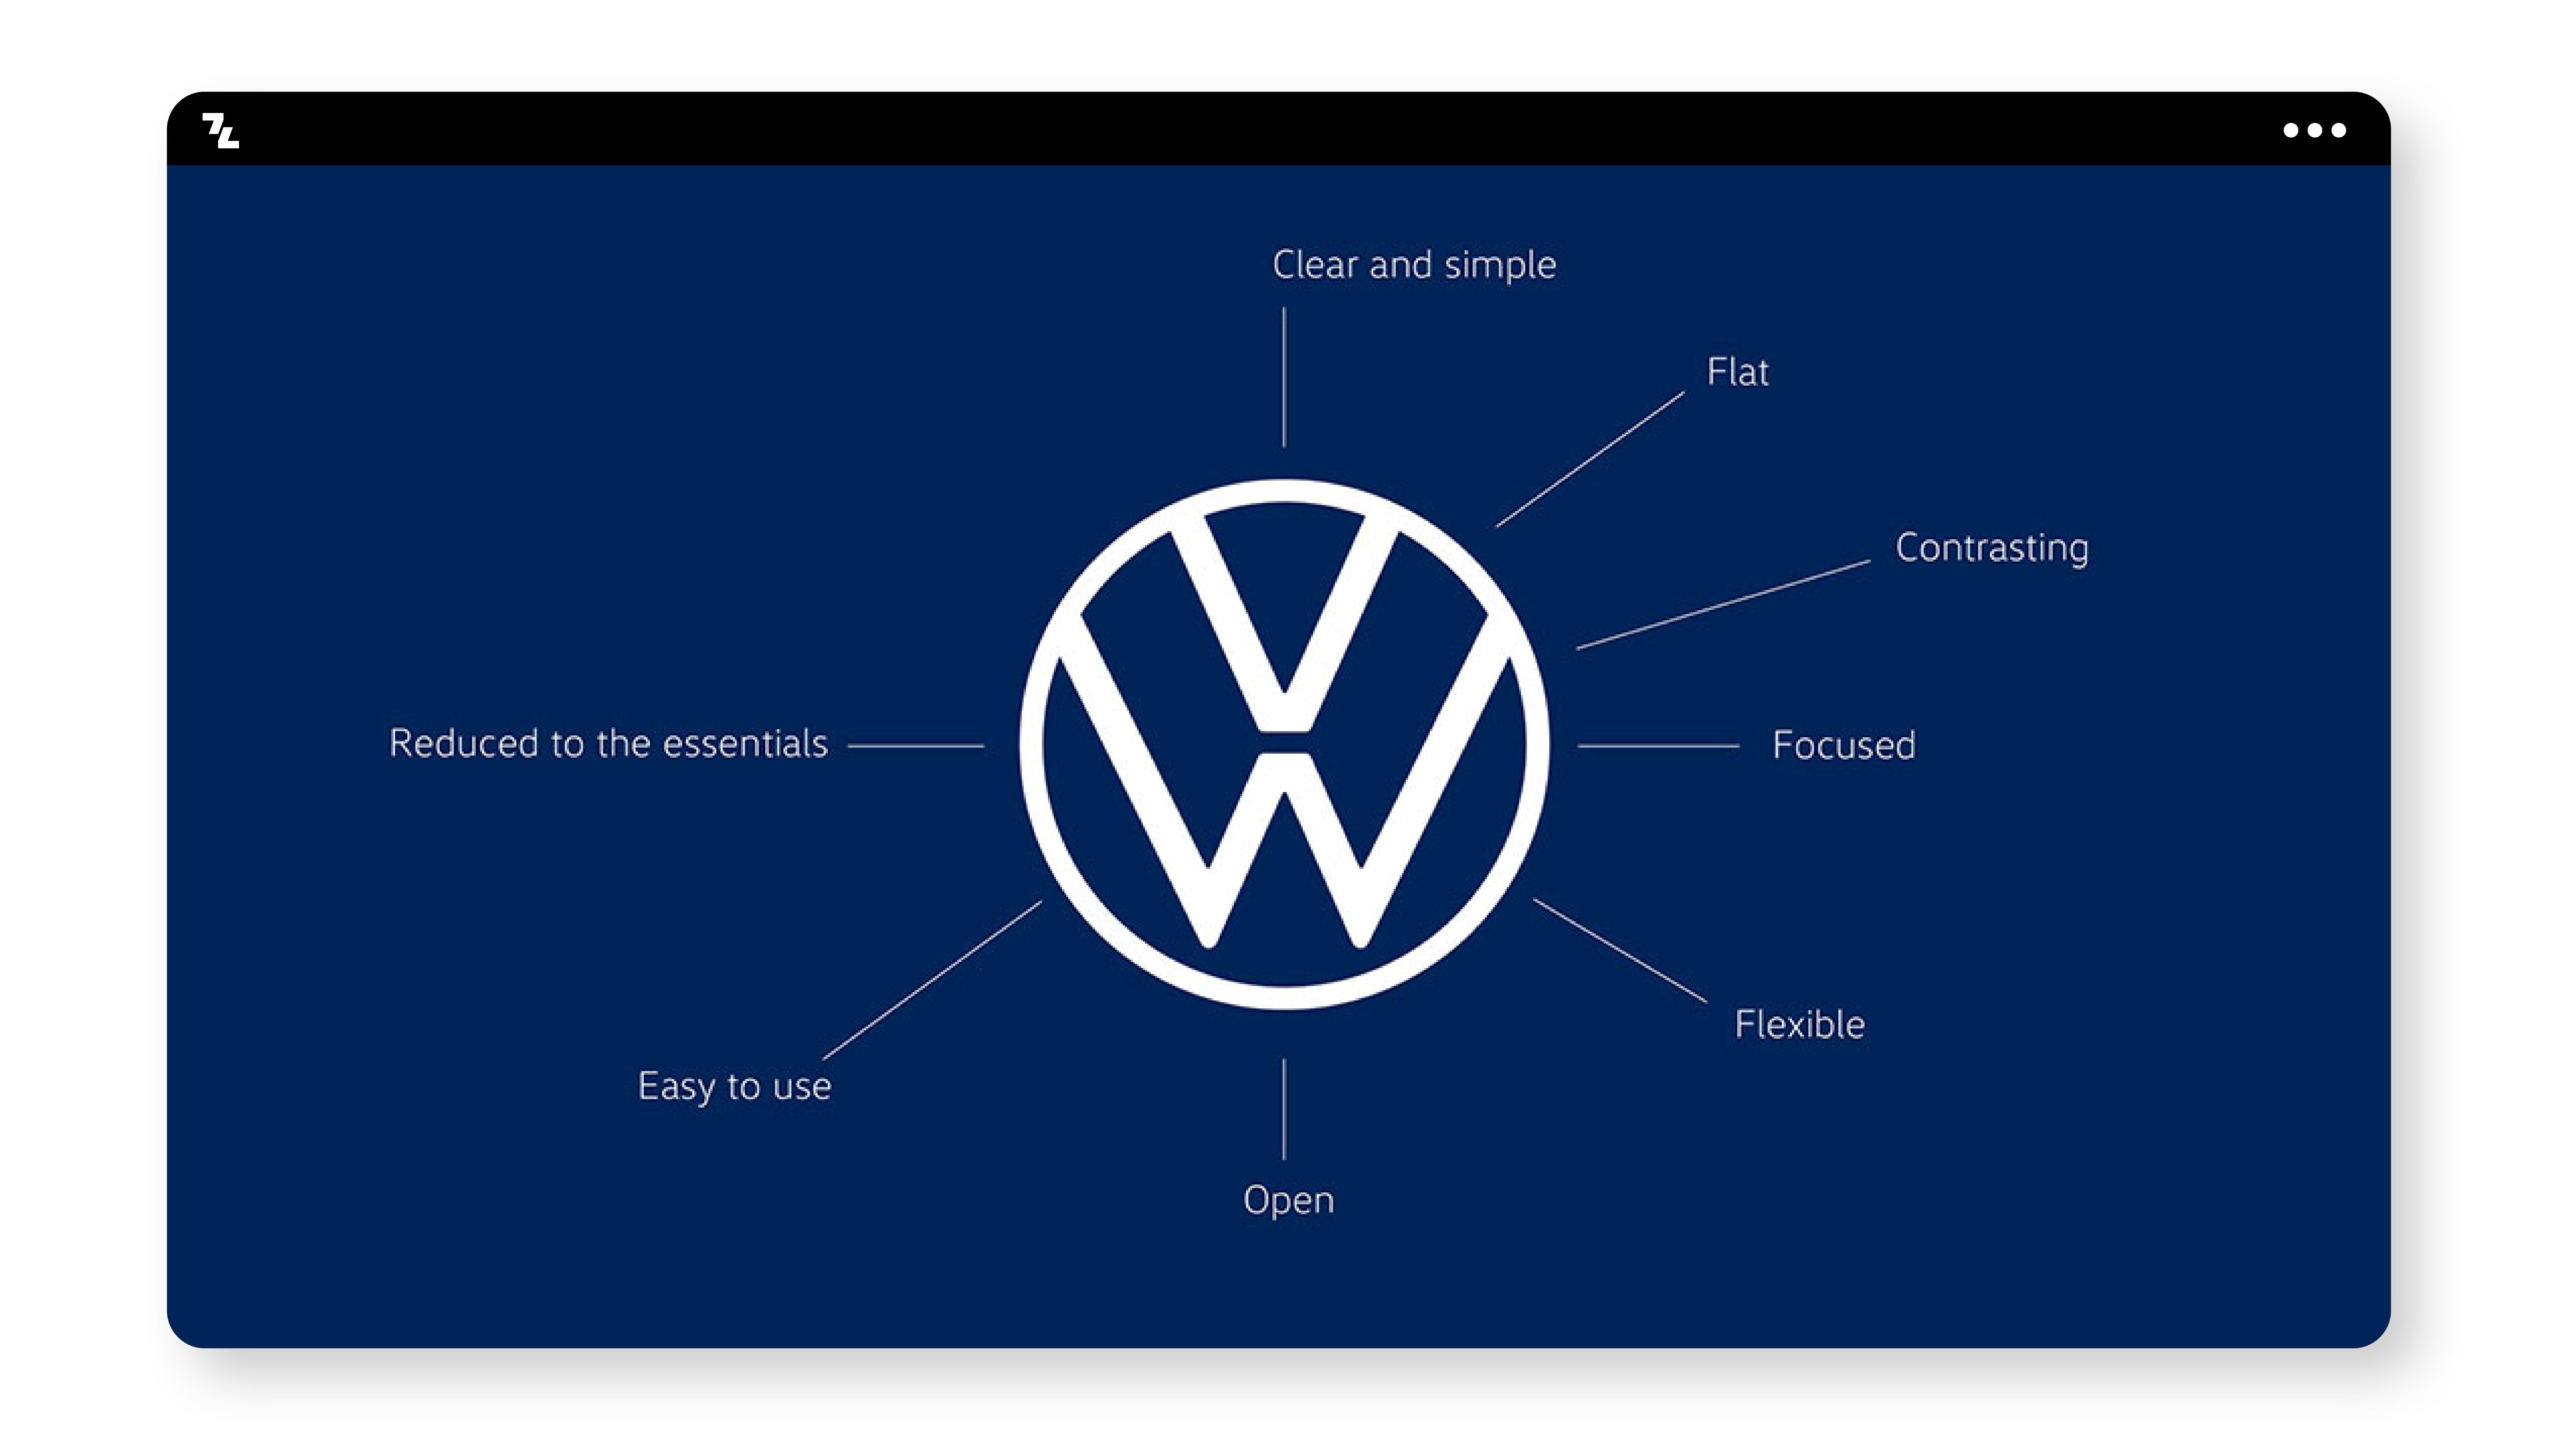 The volkswagen logo on a blue background.